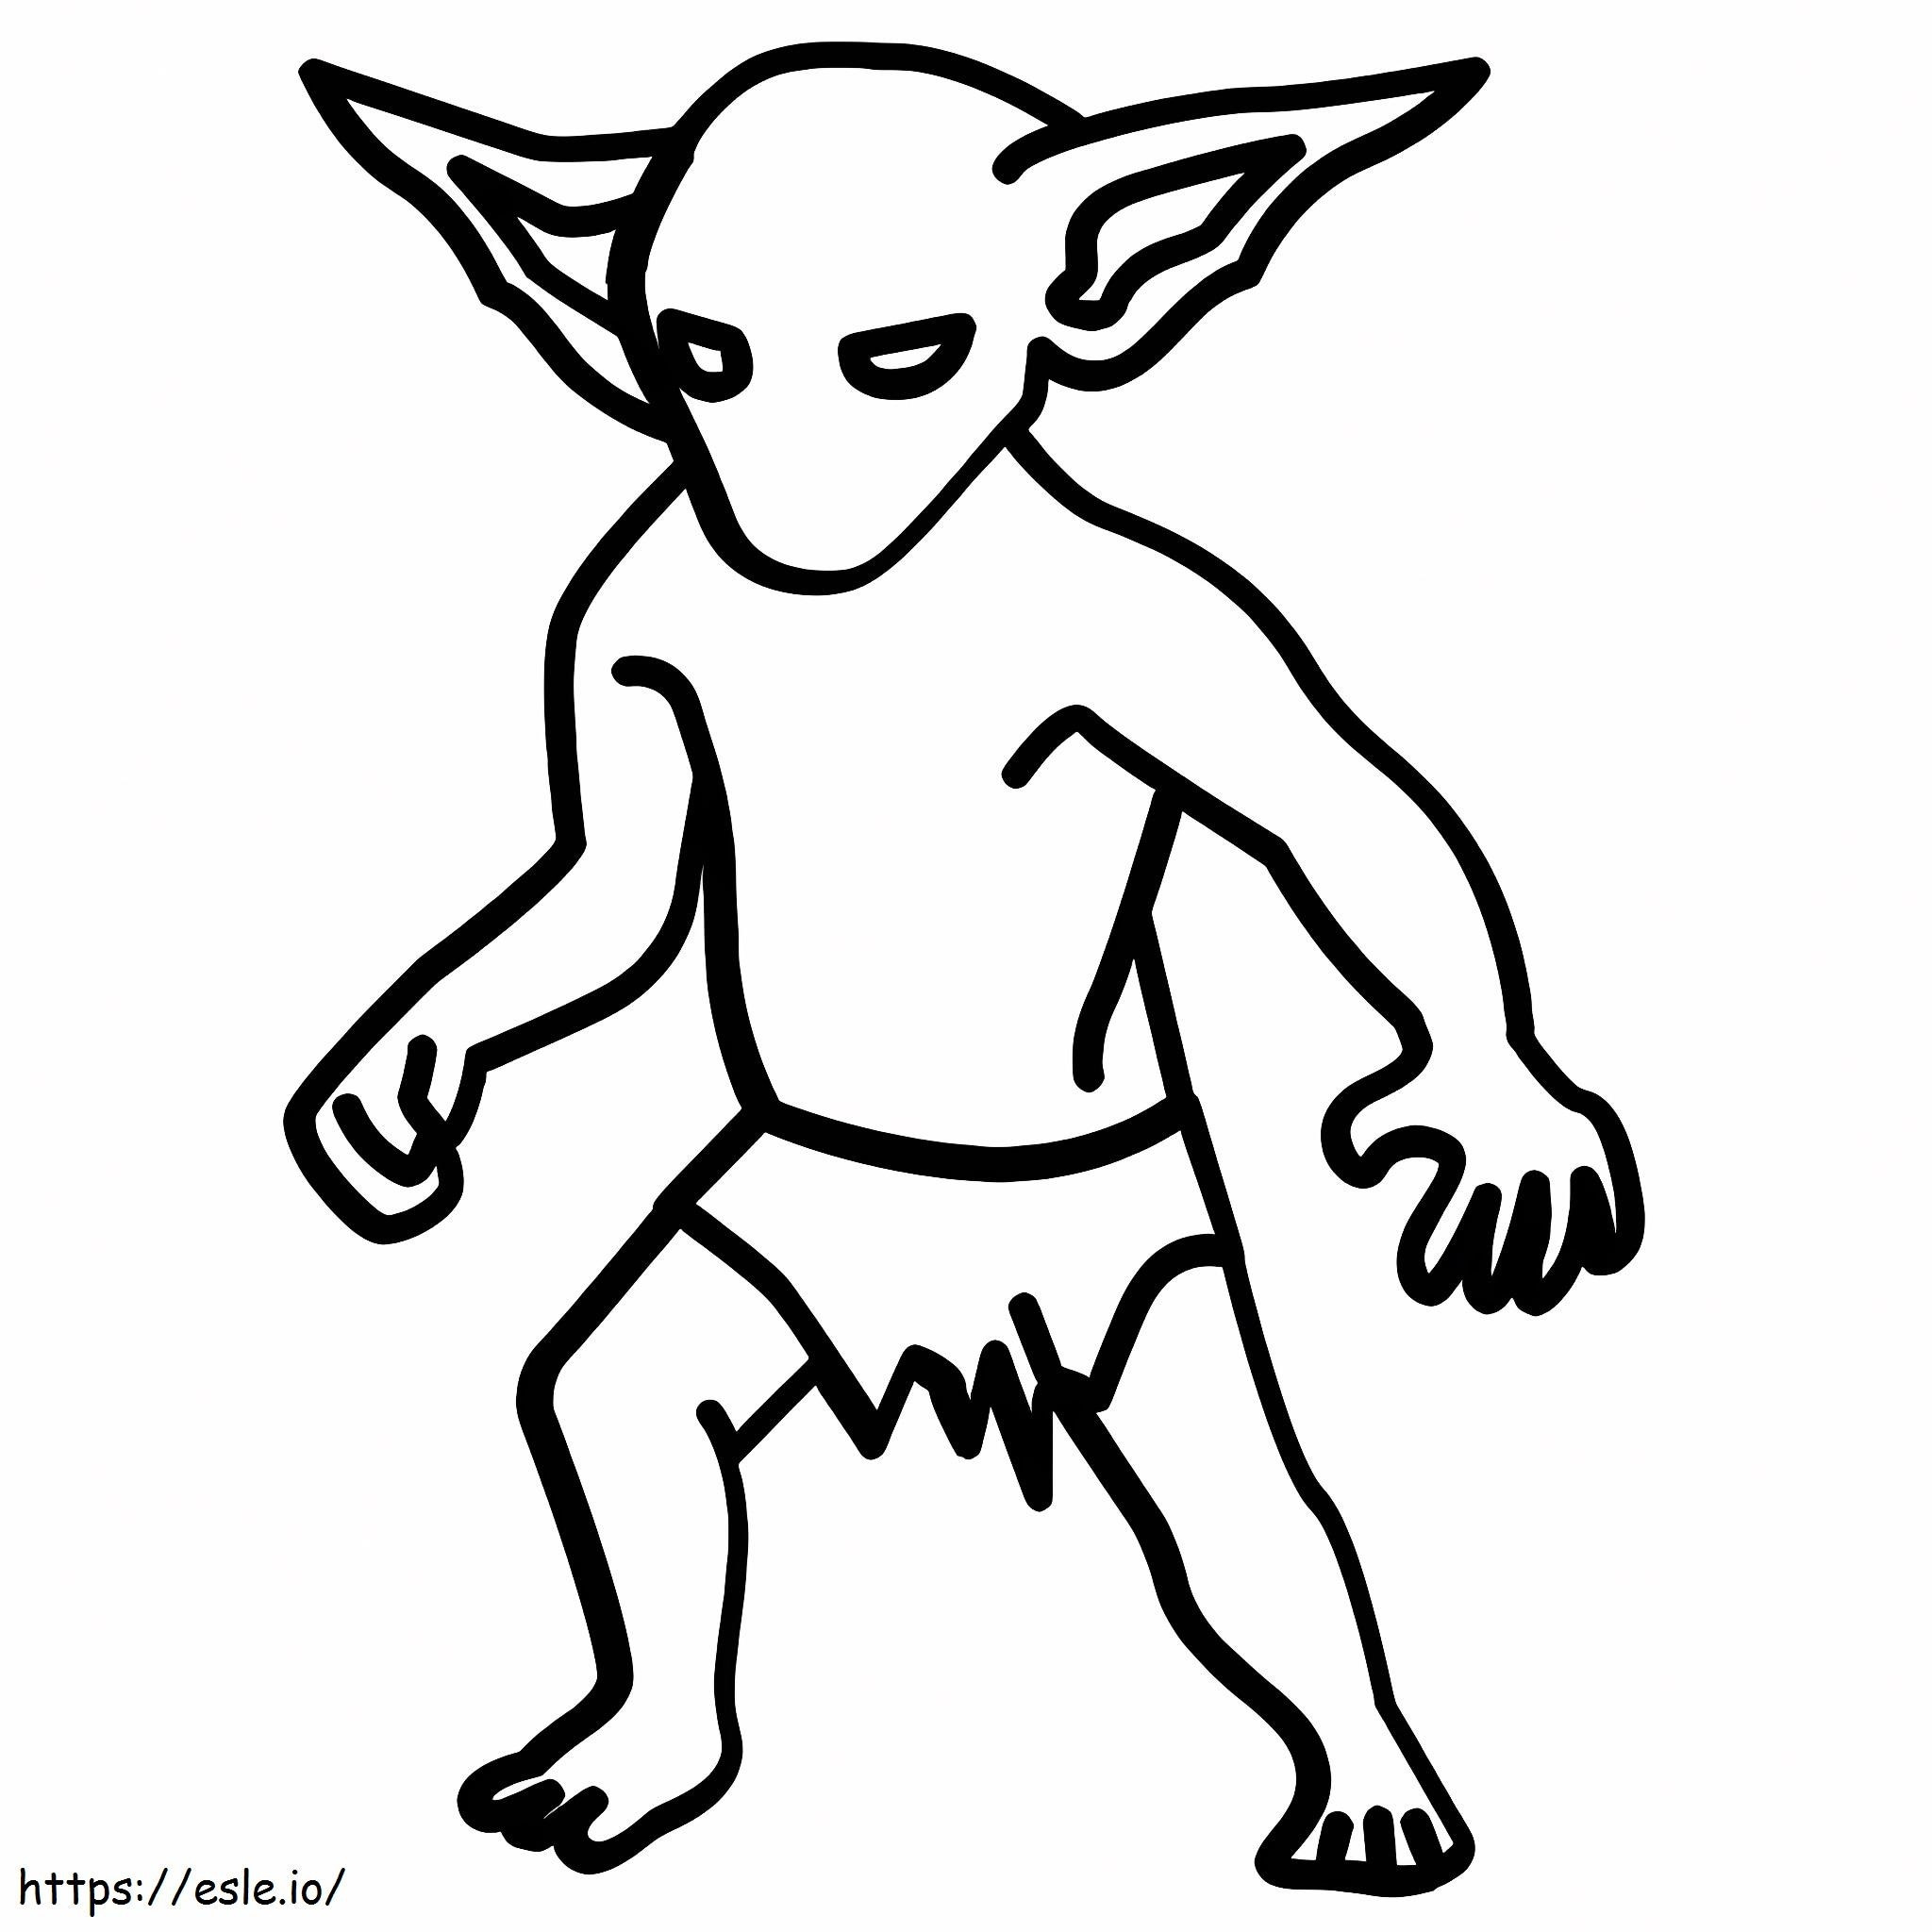 HQ Goblin Image coloring page